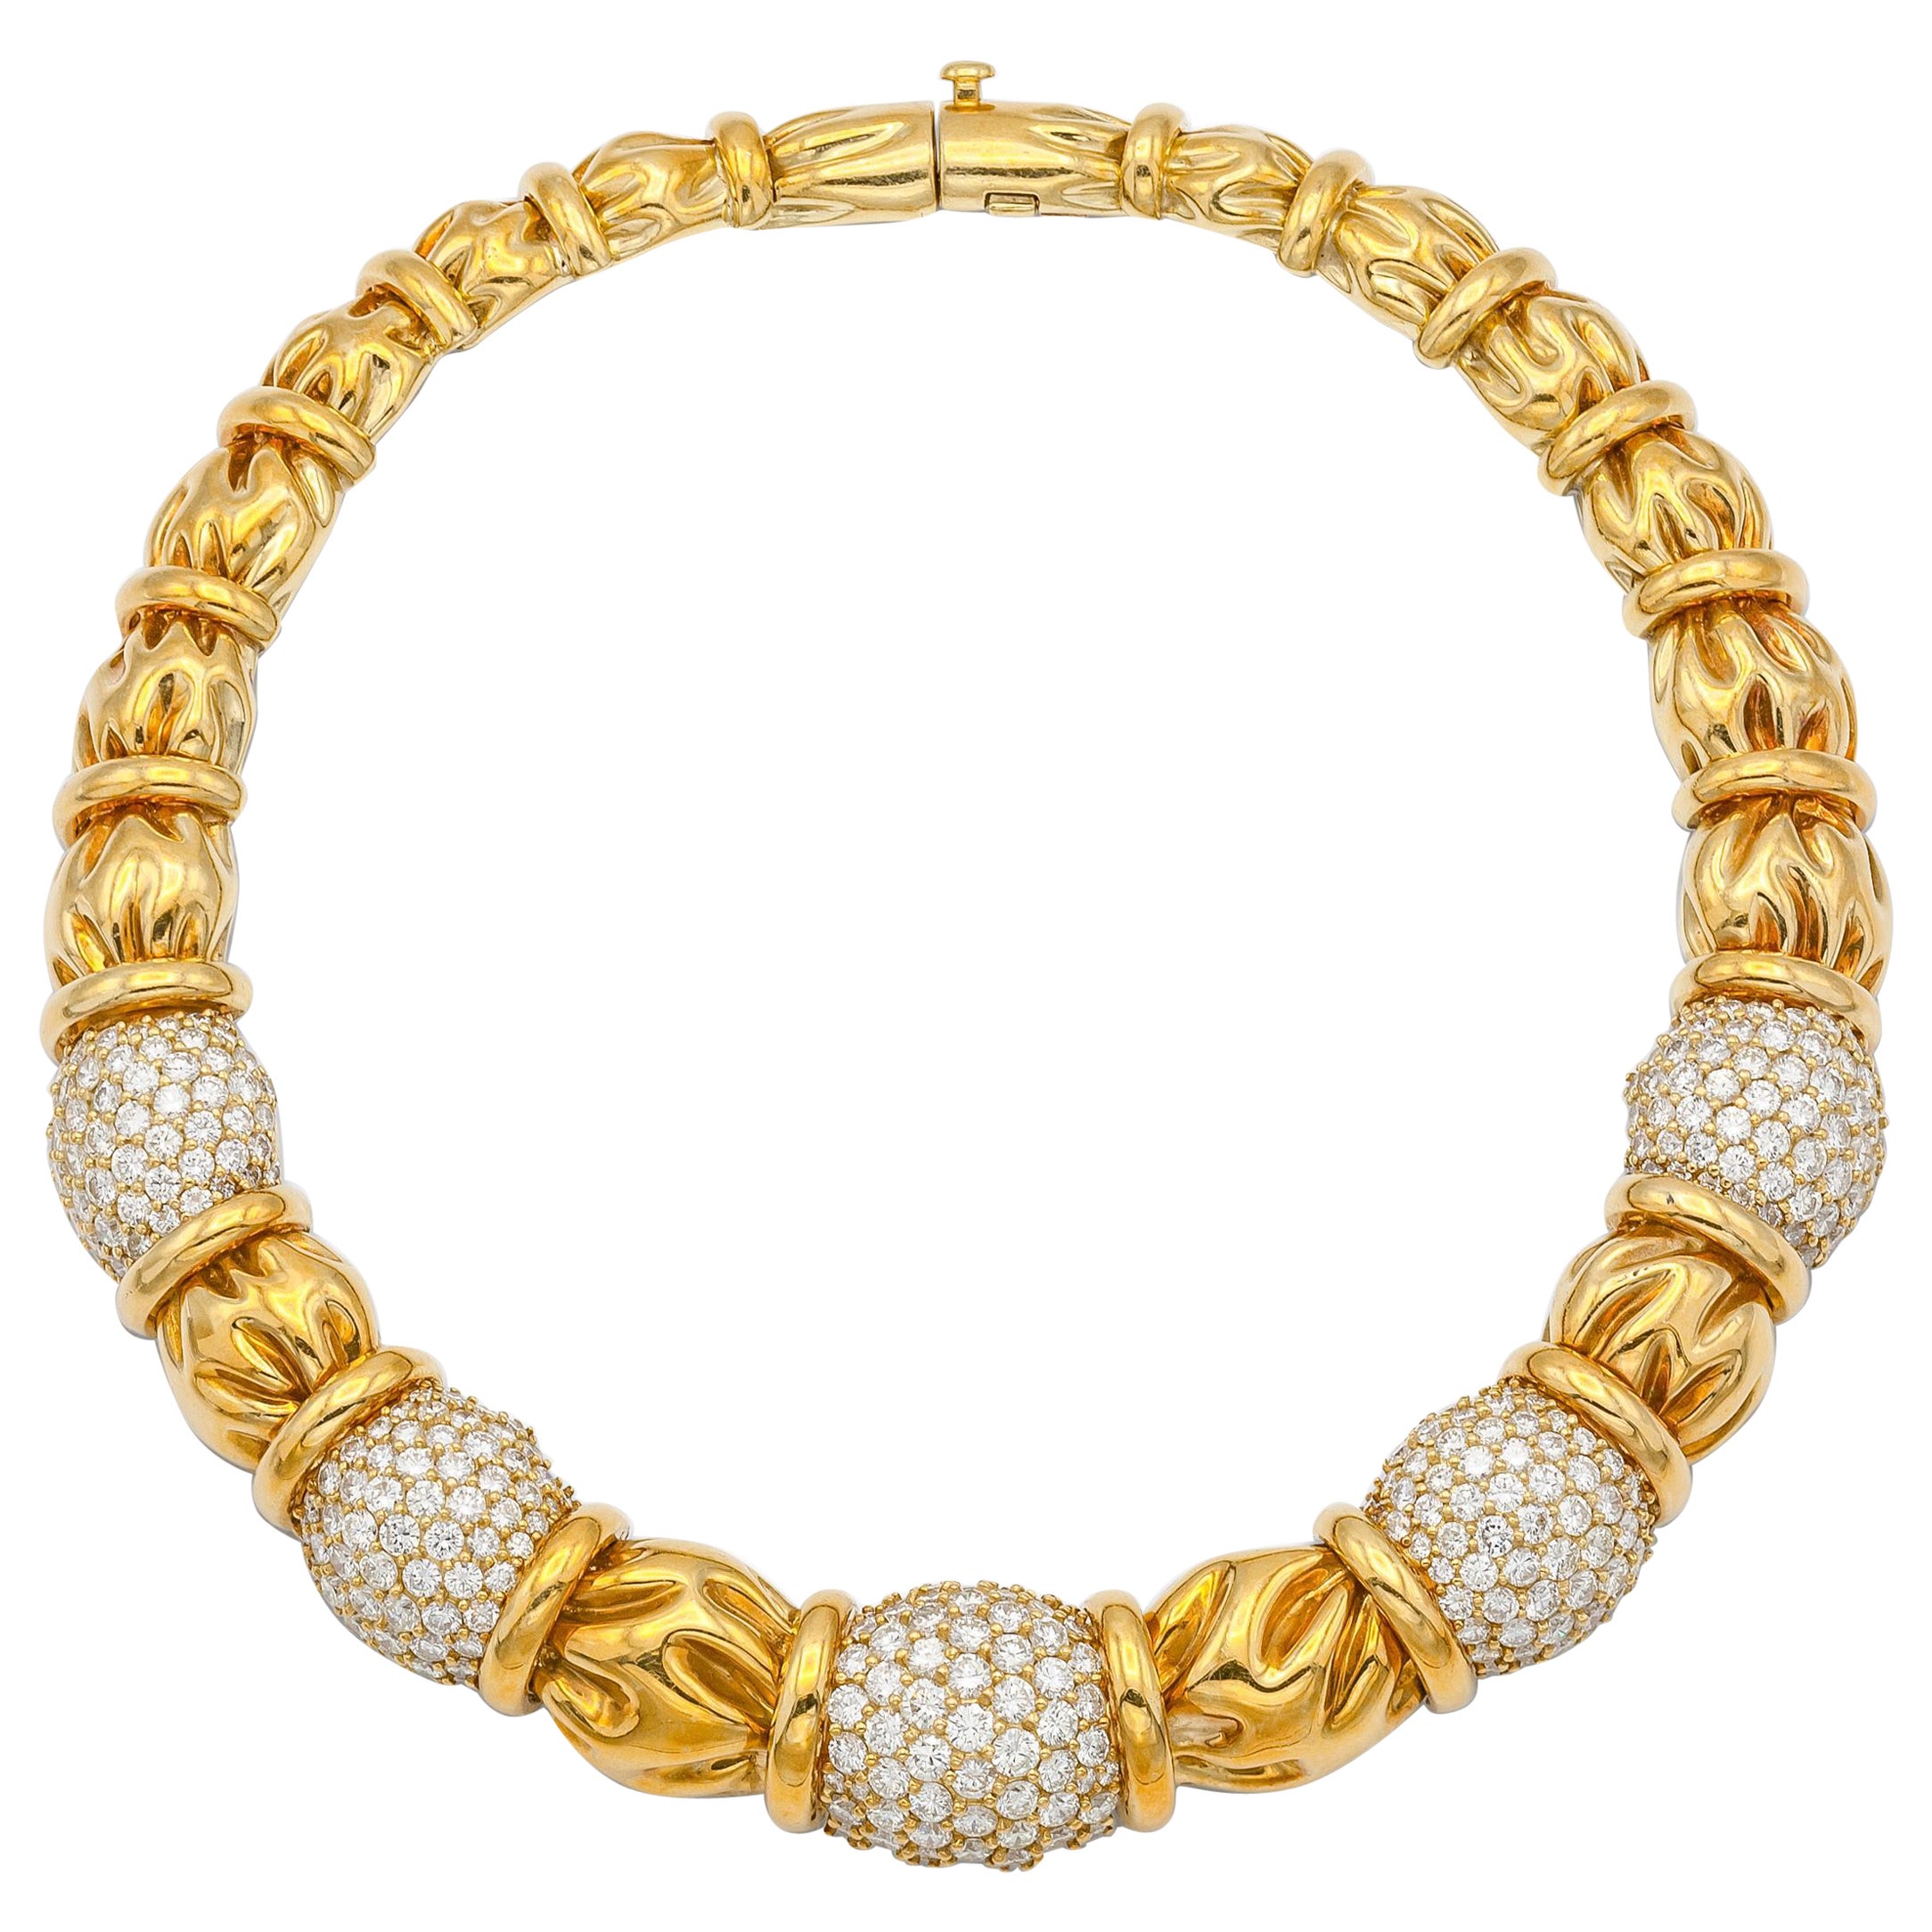 Vintage 1960s Jose Hess Gold and Diamond Choker Necklace For Sale